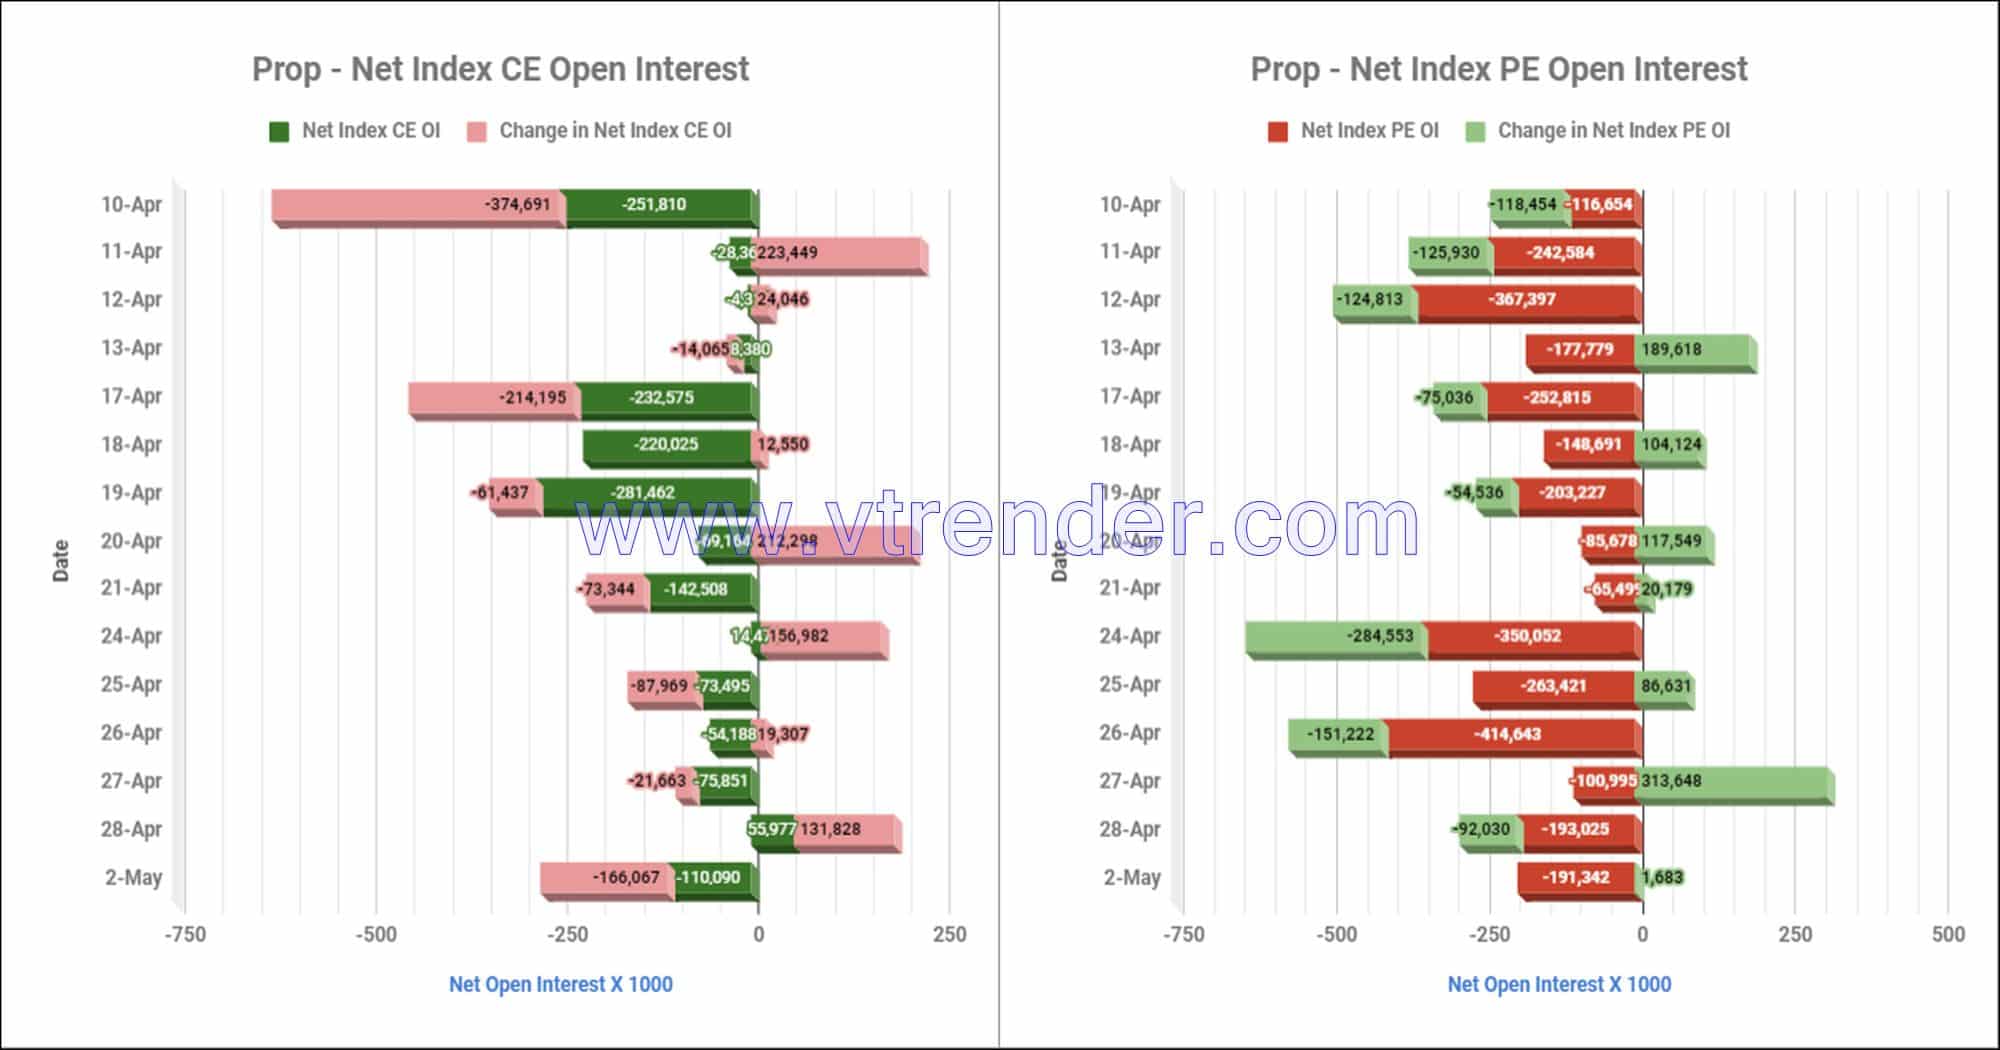 Proinop02May Participantwise Net Open Interest And Net Equity Investments – 2Nd May 2023 Client, Equity, Fii, Index Futures, Index Options, Open Interest, Prop